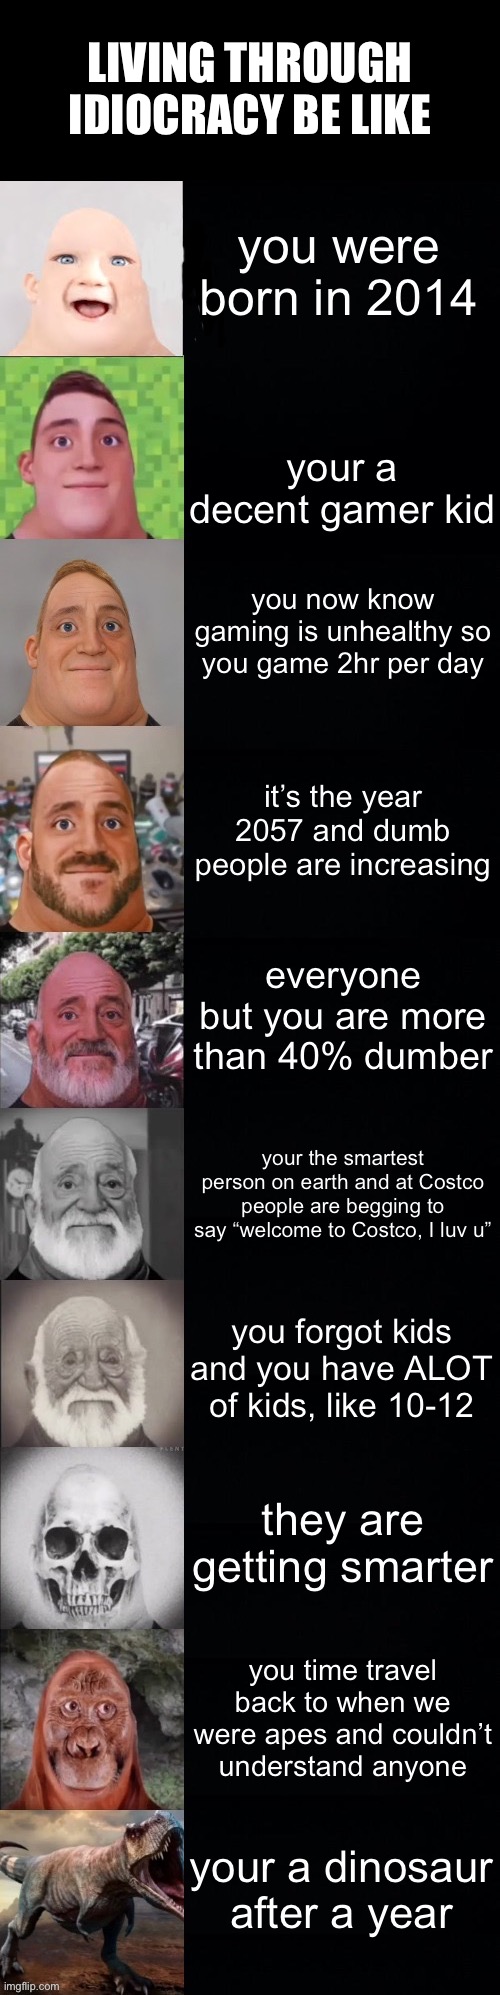 Idiocracy Life | LIVING THROUGH IDIOCRACY BE LIKE; you were born in 2014; your a decent gamer kid; you now know gaming is unhealthy so you game 2hr per day; it’s the year 2057 and dumb people are increasing; everyone but you are more than 40% dumber; your the smartest person on earth and at Costco people are begging to say “welcome to Costco, I luv u”; you forgot kids and you have ALOT of kids, like 10-12; they are getting smarter; you time travel back to when we were apes and couldn’t understand anyone; your a dinosaur after a year | image tagged in mr incredible becoming old,long time,funny,golden,memes | made w/ Imgflip meme maker